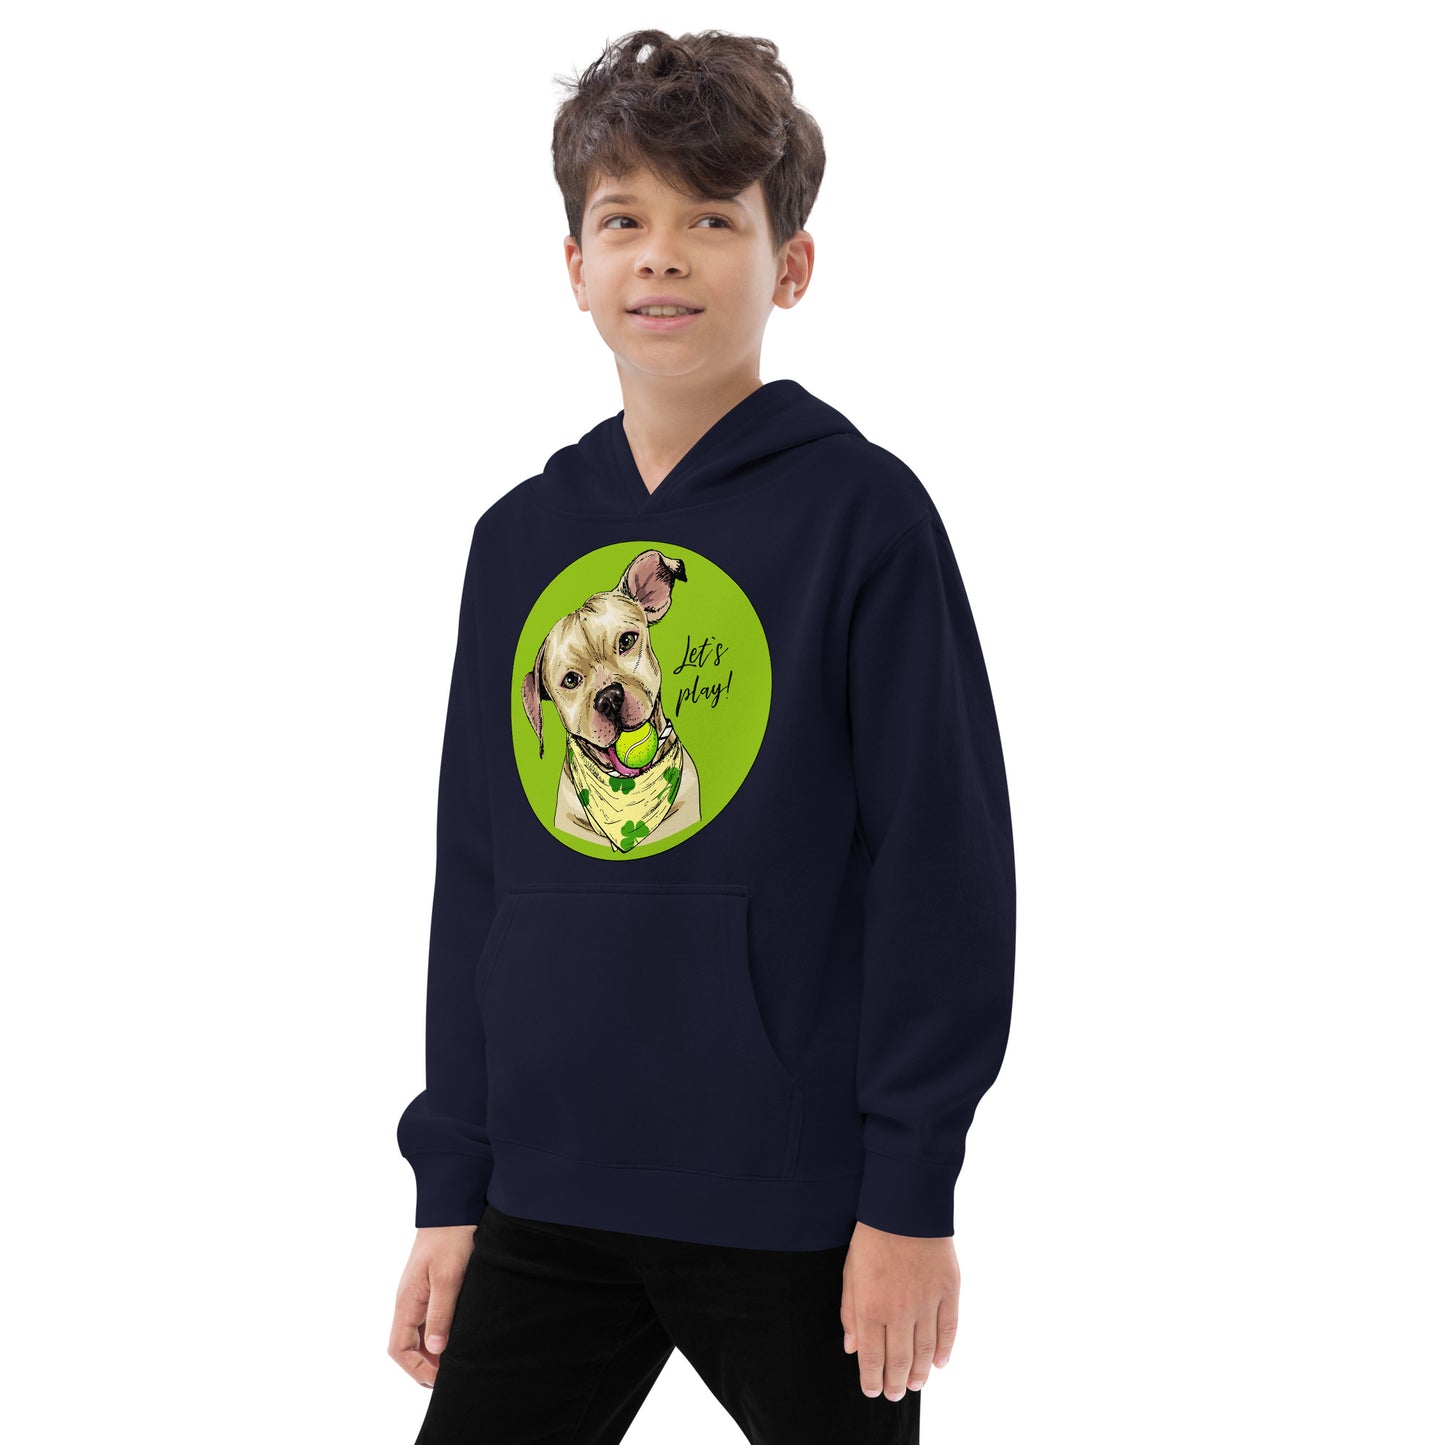 Funny American Pit Bull Terrier Dog with Tennis Ball Hoodie, No. 0558